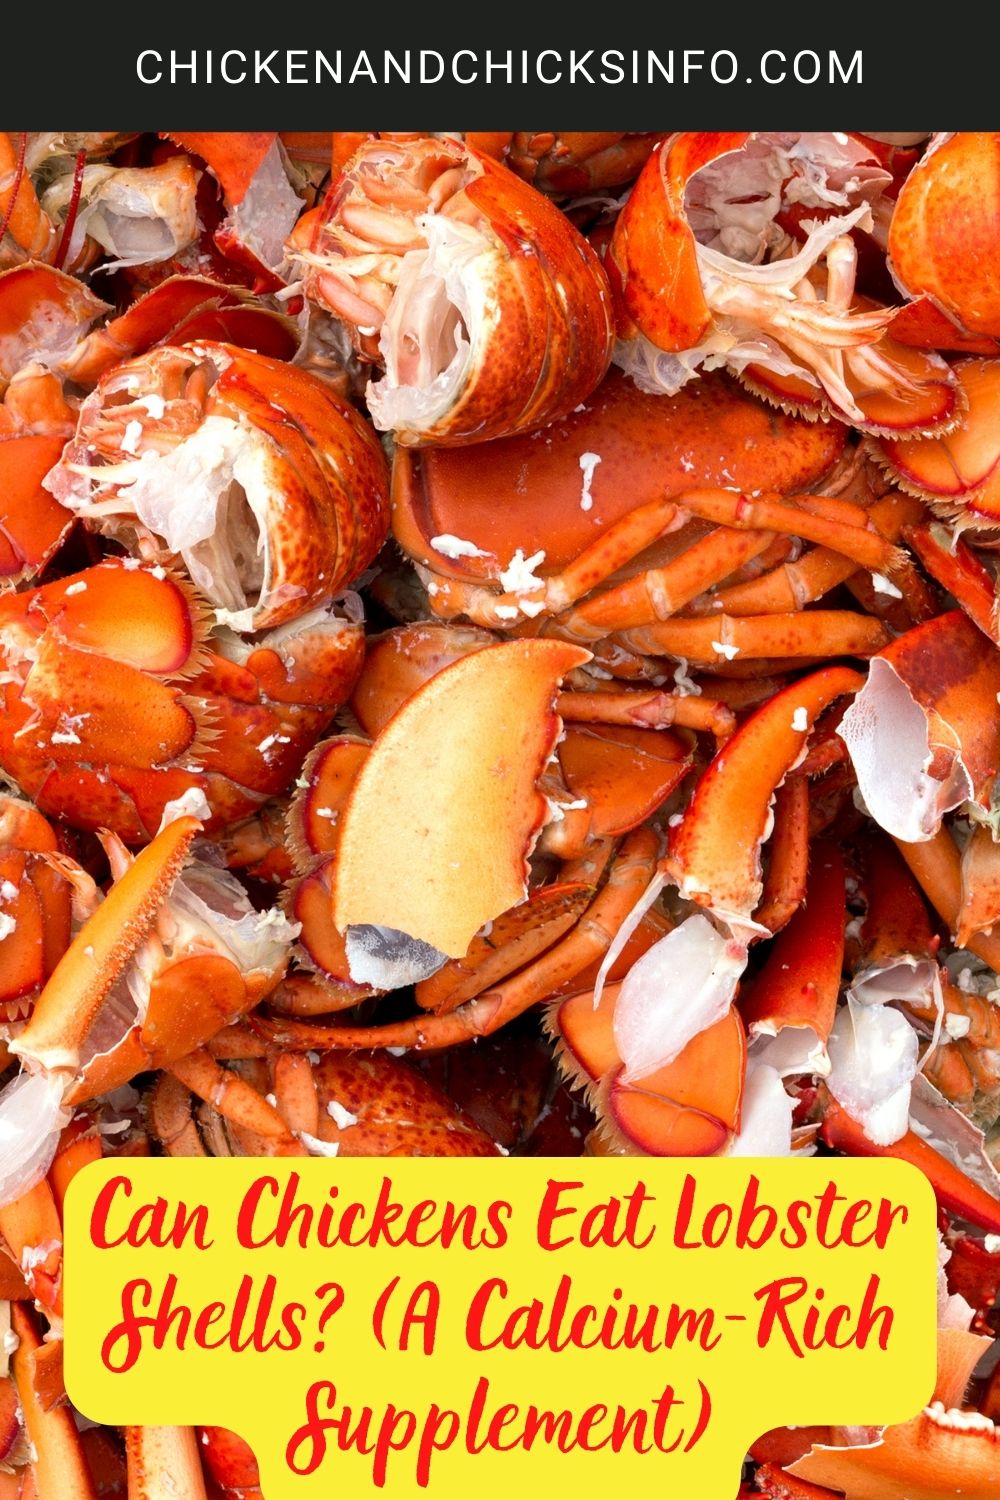 Can Chickens Eat Lobster Shells? (A Calcium-Rich Supplement) poster.
